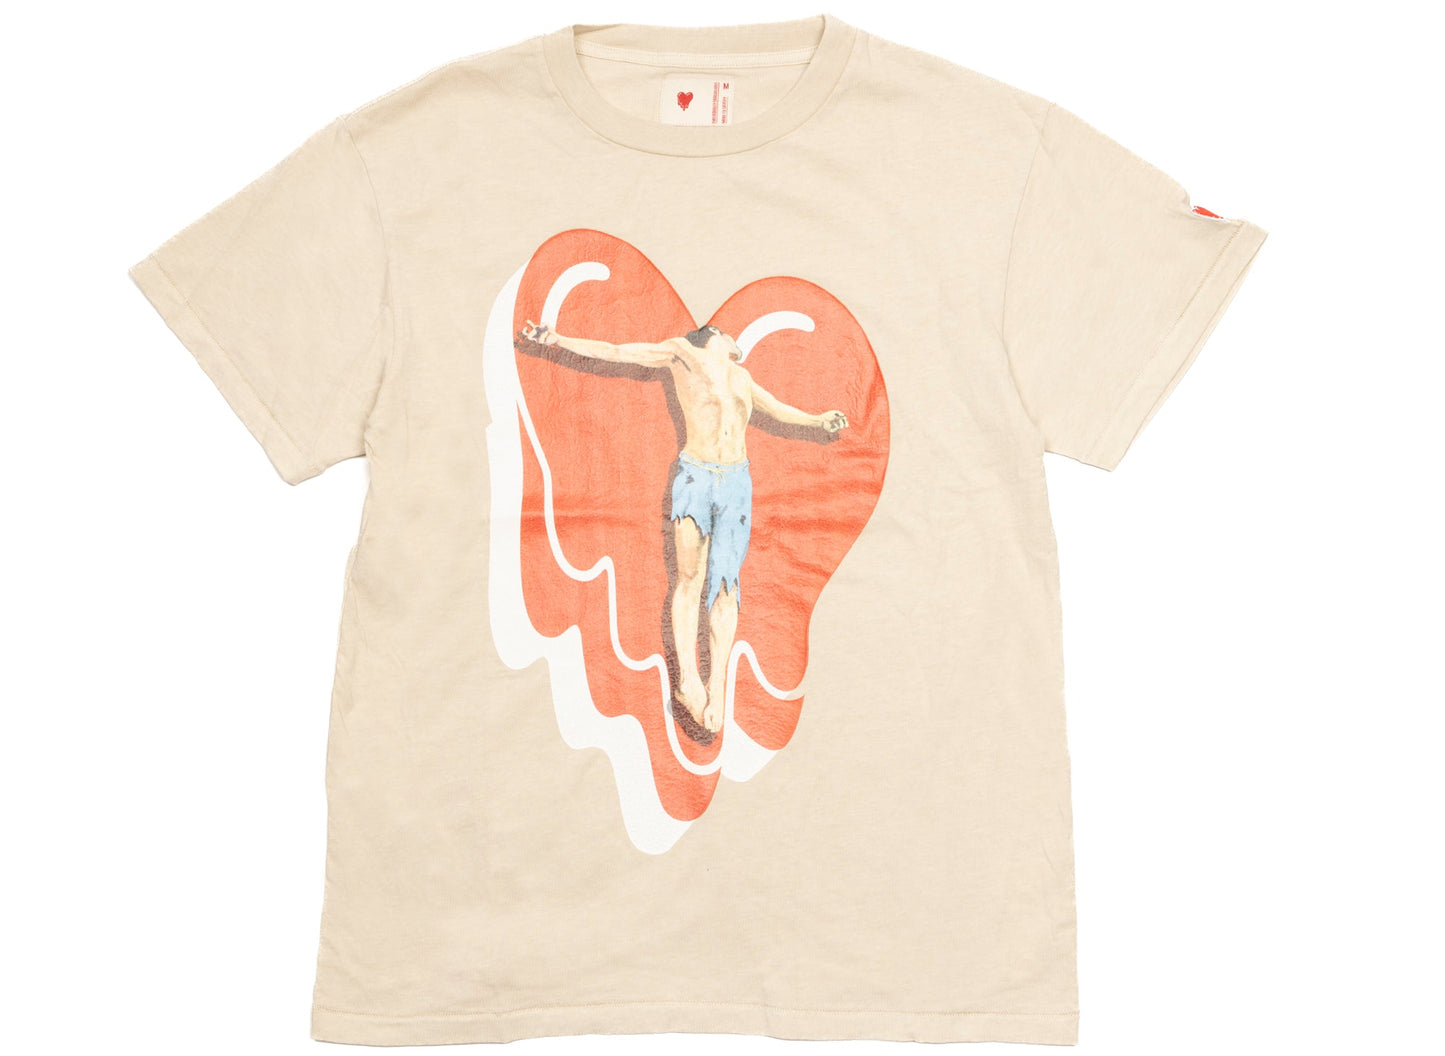 Emotionally Unavailable Cross Your Heart Tee